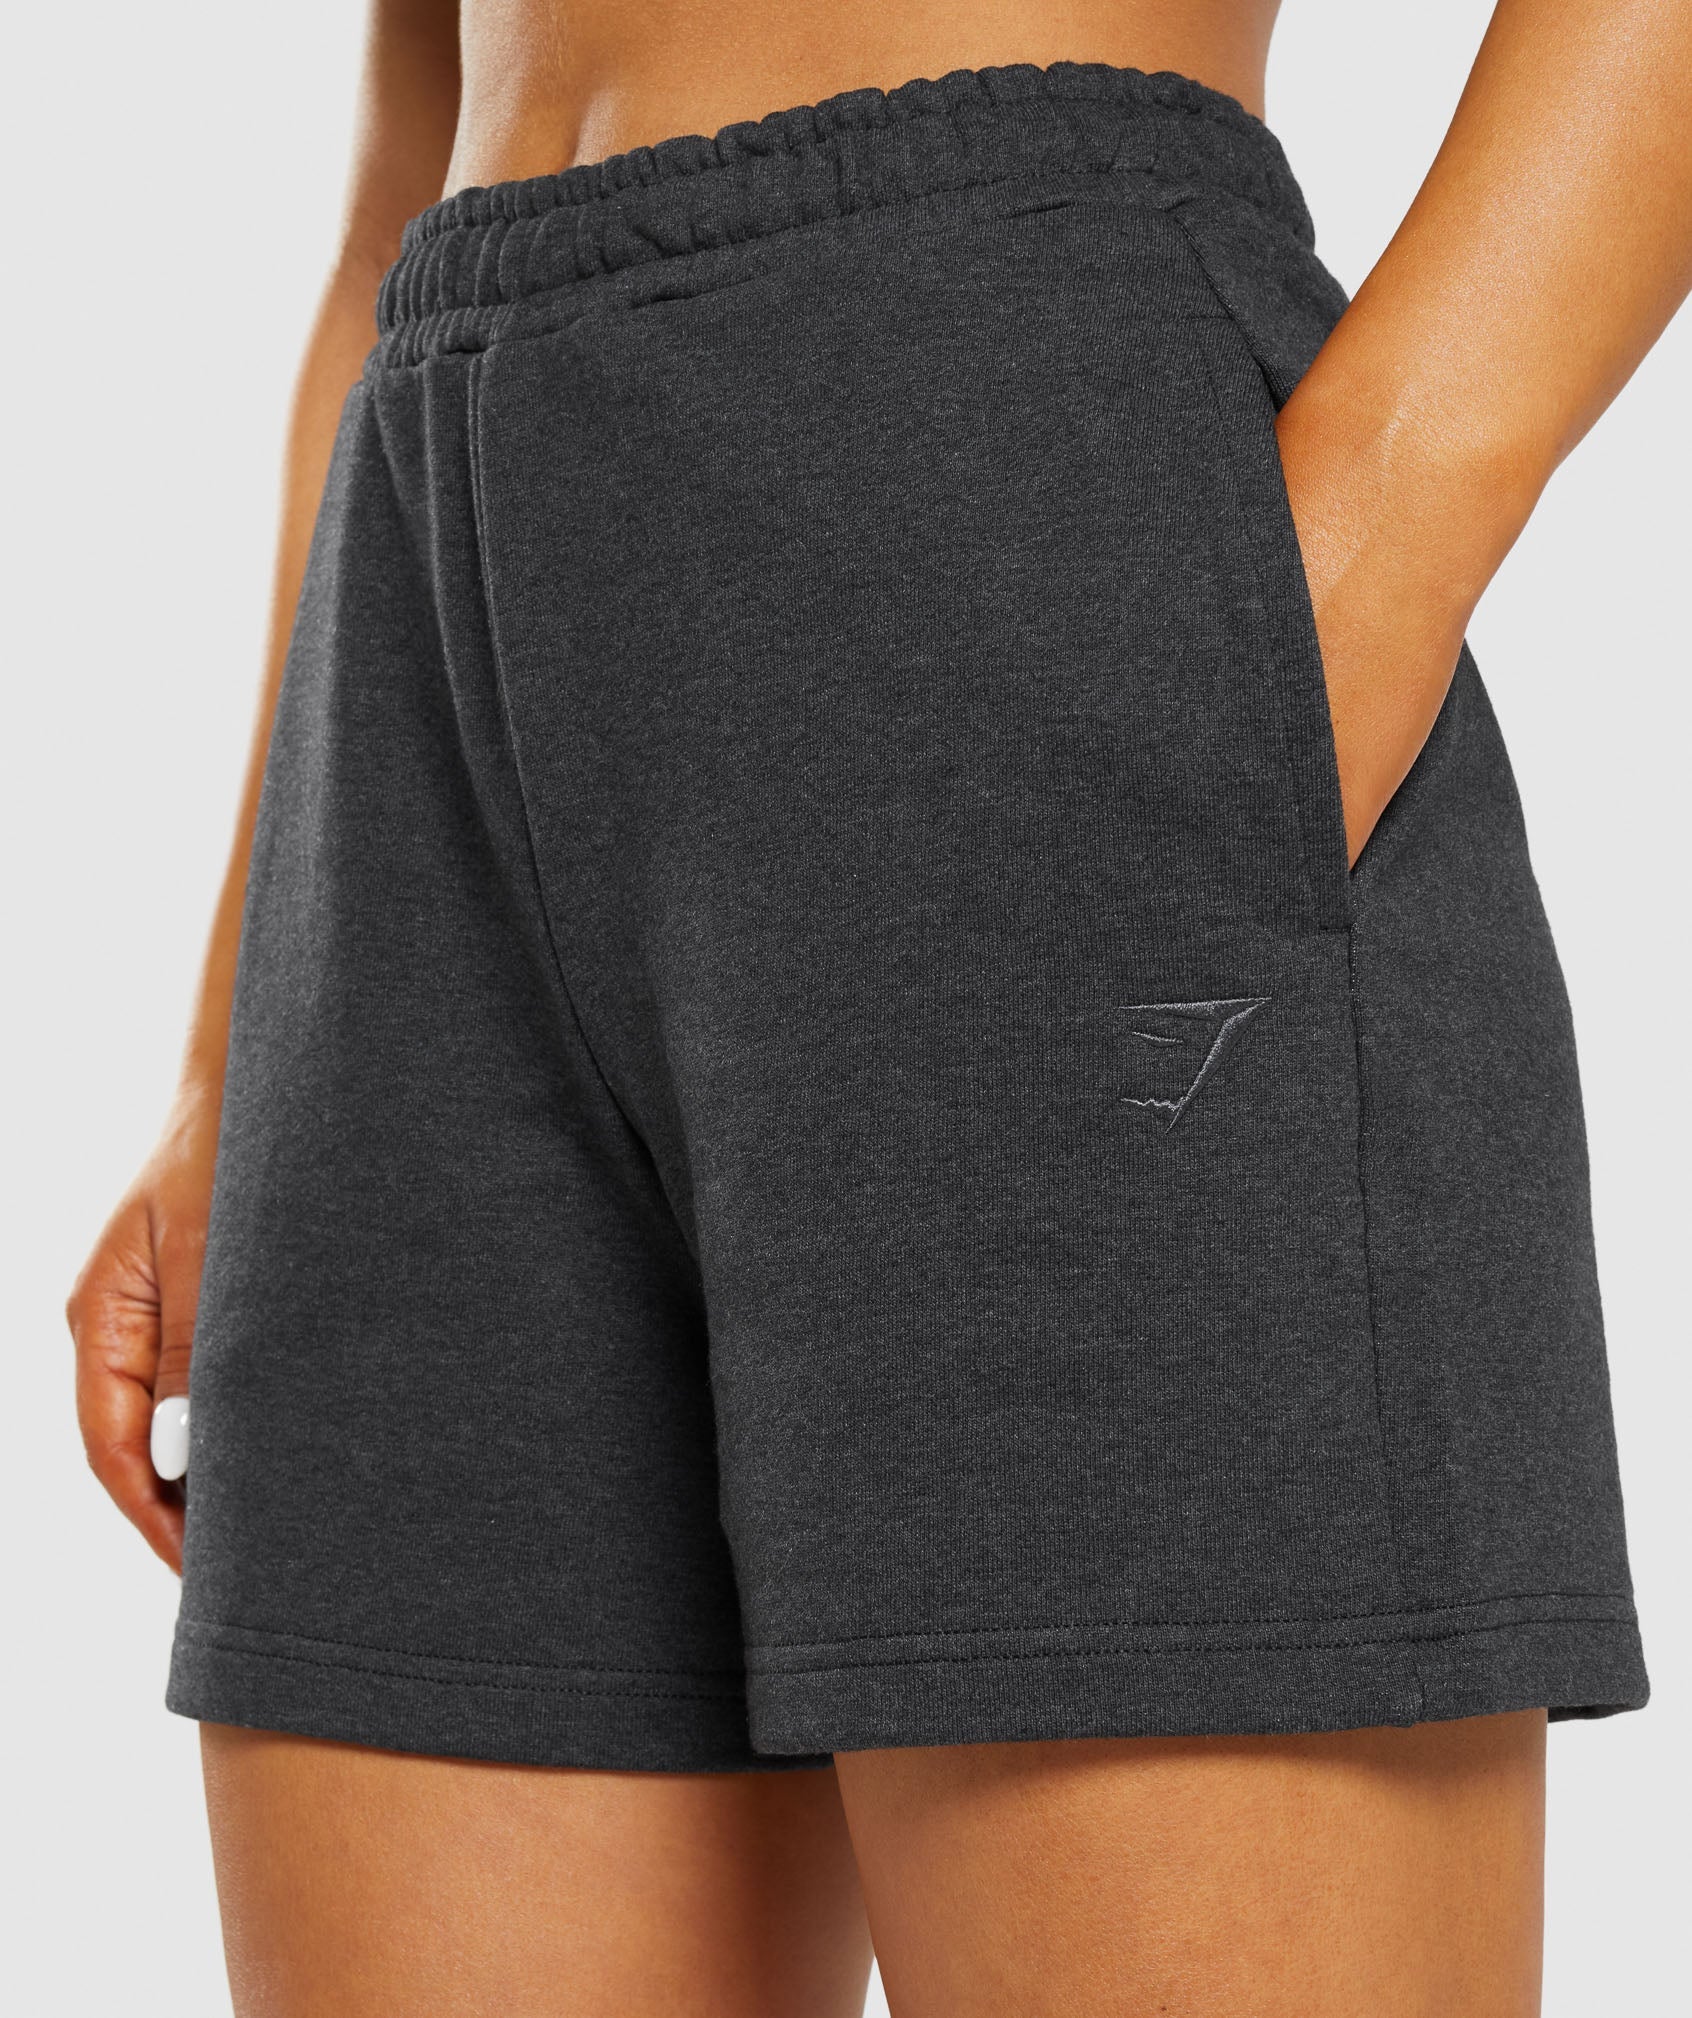 Rest Day Sweats Shorts in Black Core Marl - view 5